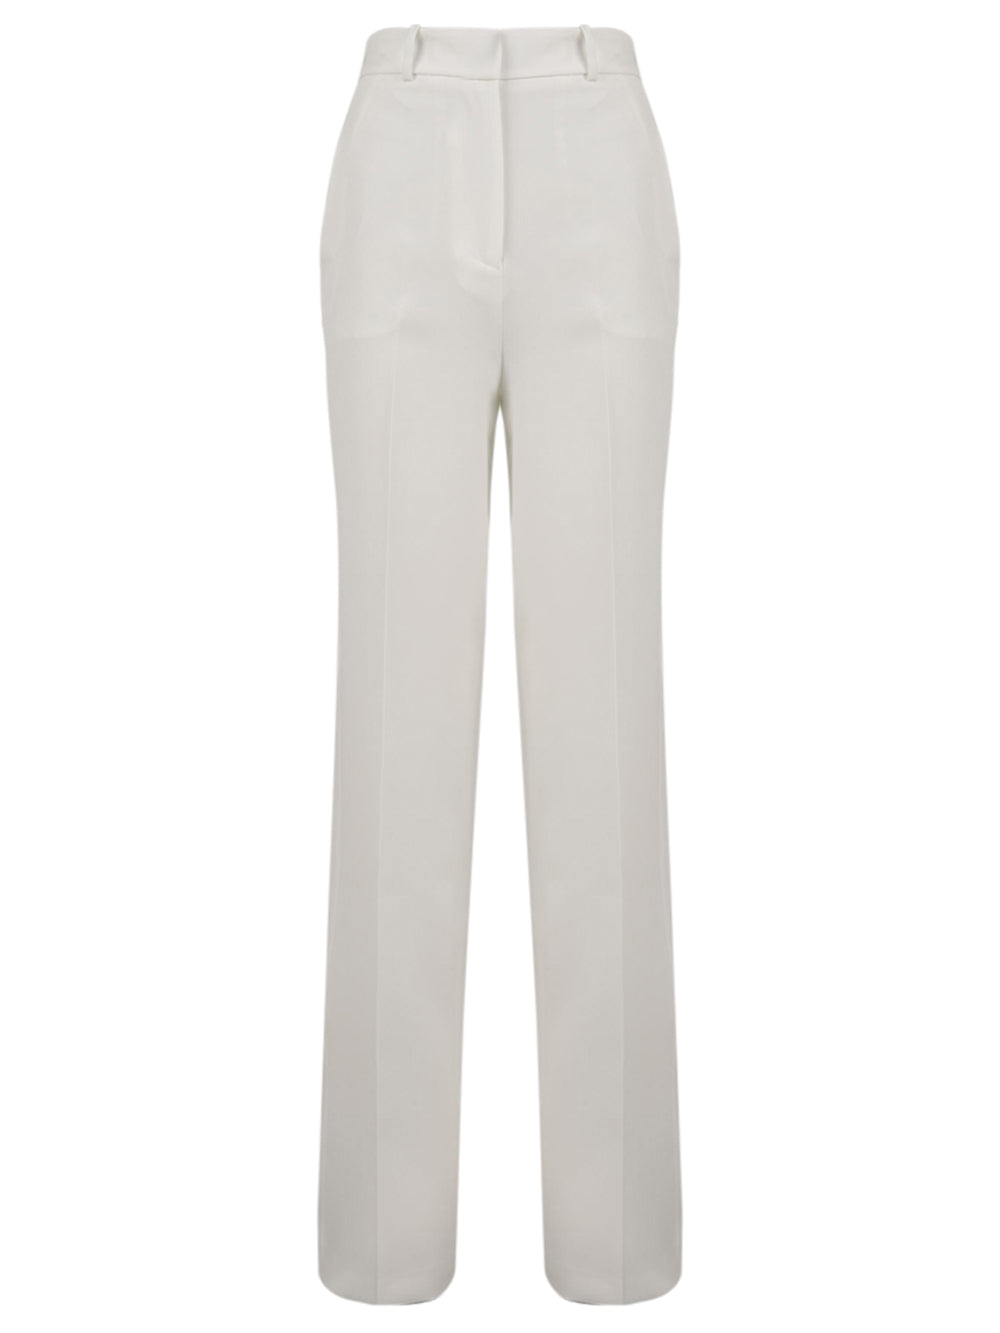 Women's palazzo trousers in solid colour